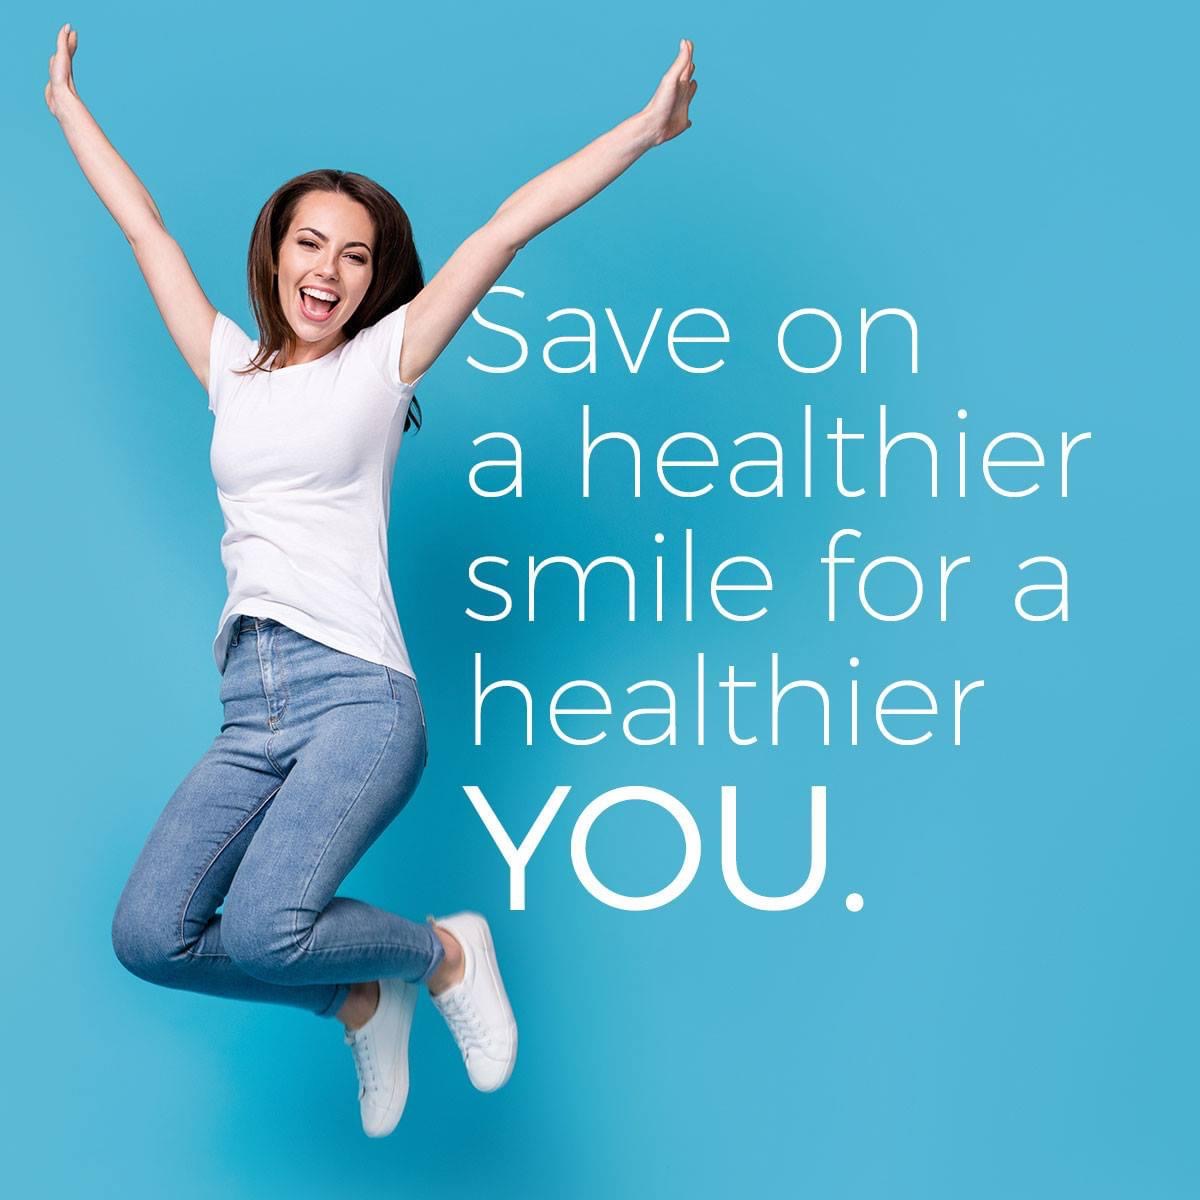 Healthy smiles for everyone 😁🦷 Dentists of Palm Beach Gardens Is offering savings on treatment with flexible payment options and same-day savings of up to 50%. See ow.ly/jvv230rvnFK for more 🌟 #dentistsofpalmbeachgardens #altontowncenter #wellnesswednesday